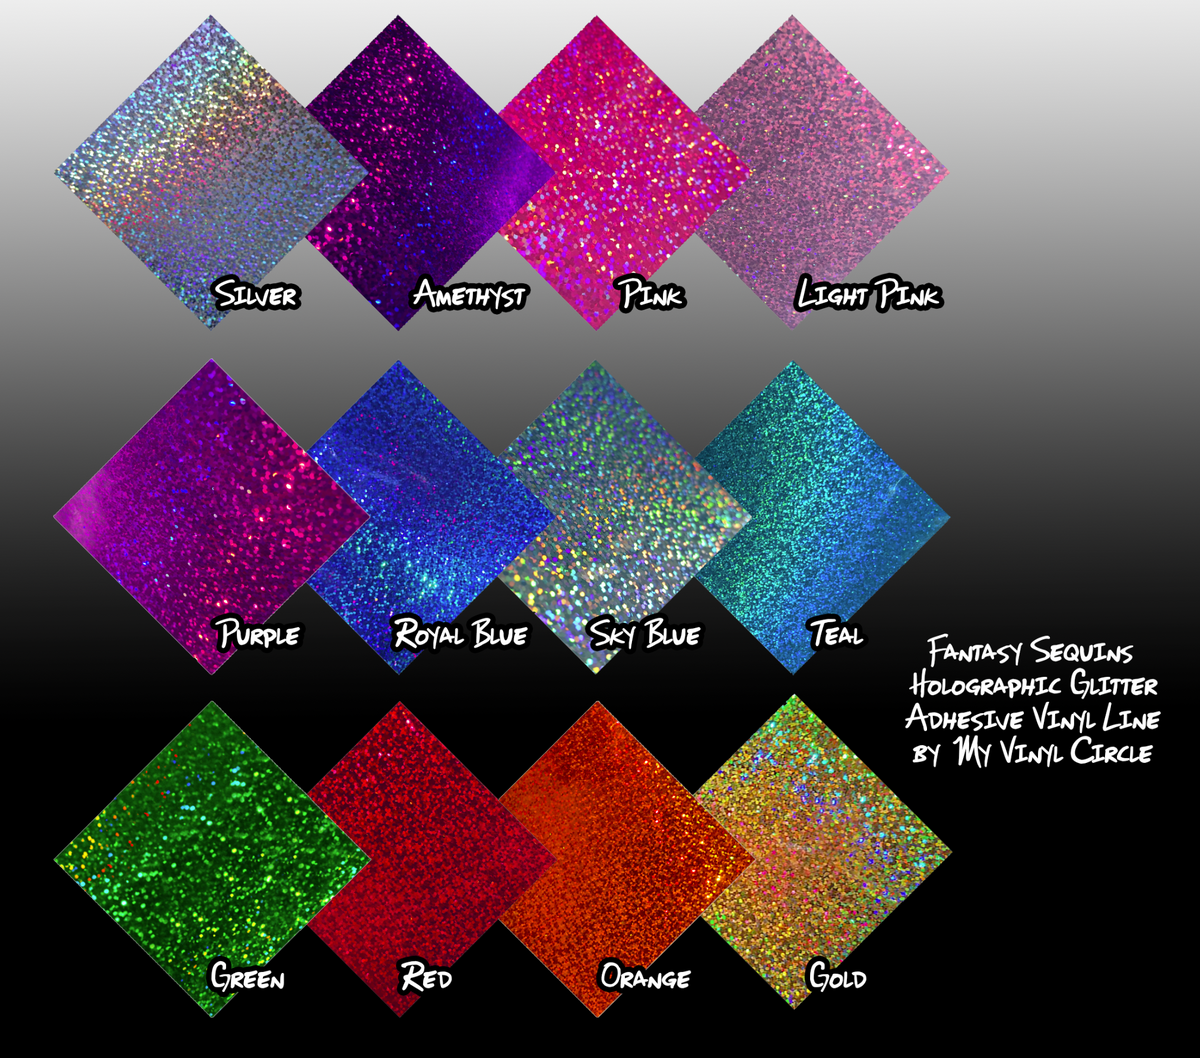 Sequins Glitter Holographic Vinyl by Schein Holographics